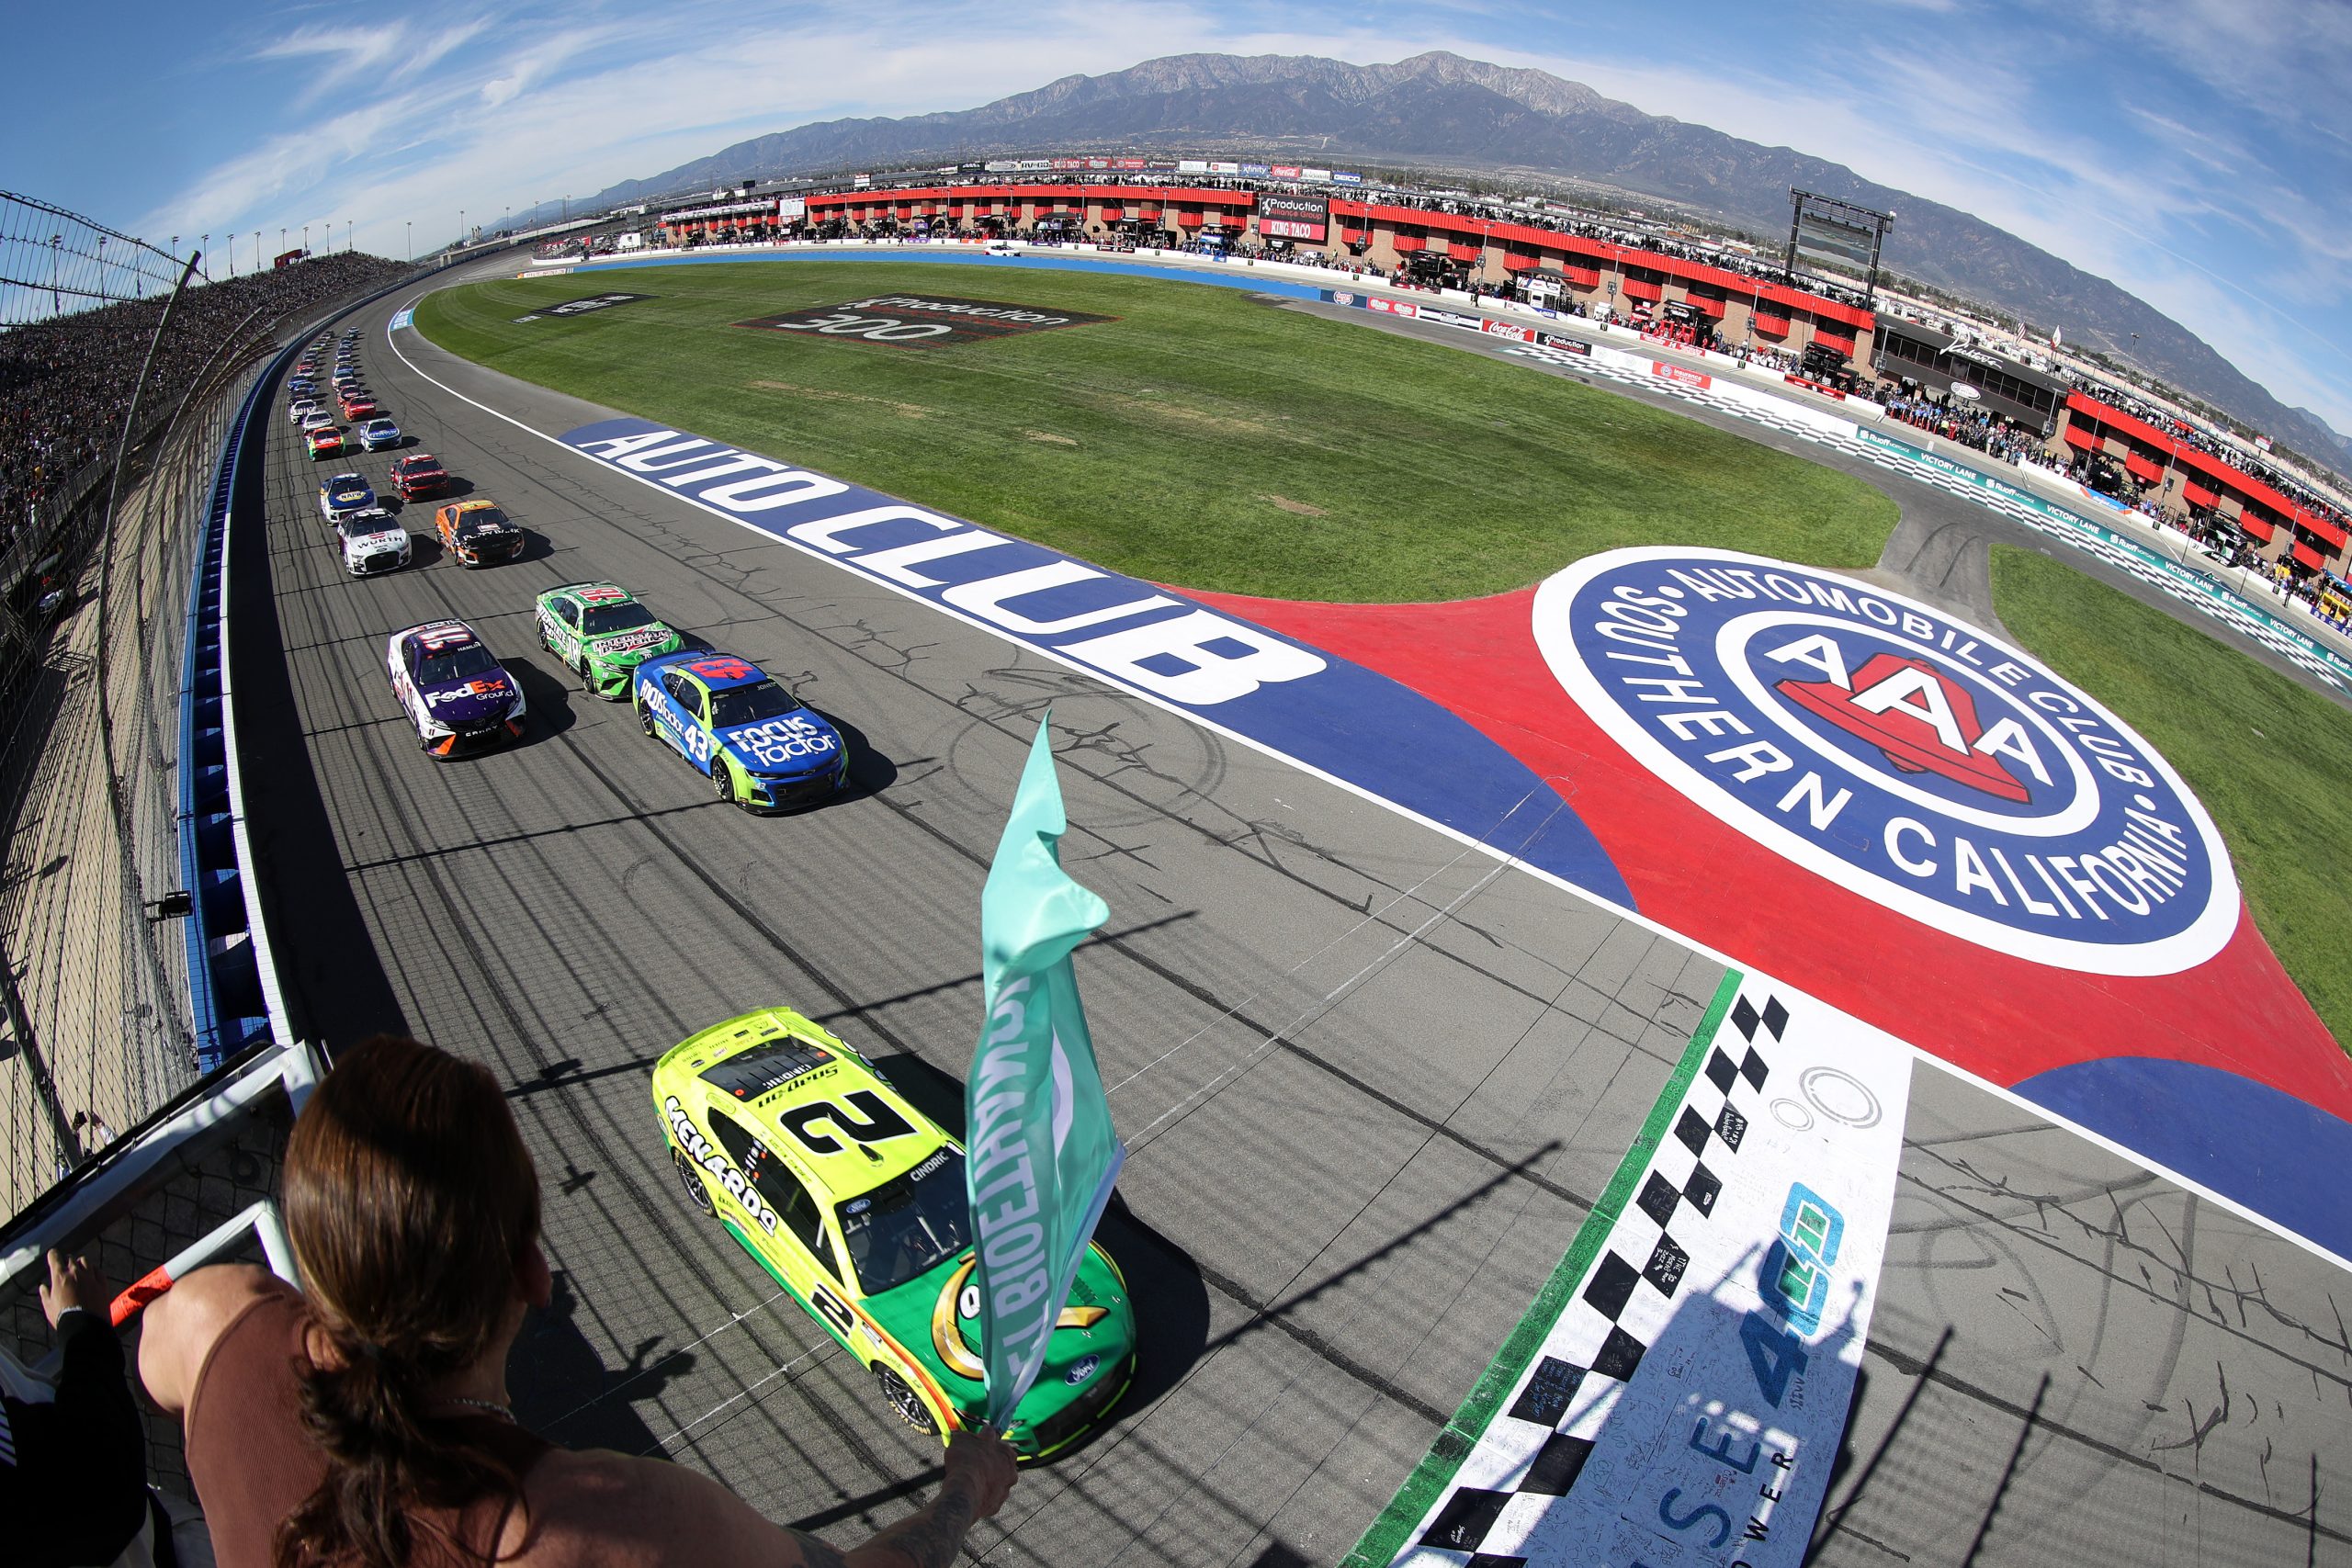 FONTANA, CALIFORNIA - FEBRUARY 27: Austin Cindric, driver of the #2 Menards/Quaker State Ford, leads the field to the green flag to start the NASCAR Cup Series Wise Power 400 at Auto Club Speedway on February 27, 2022 in Fontana, California. (Photo by Meg Oliphant/Getty Images)